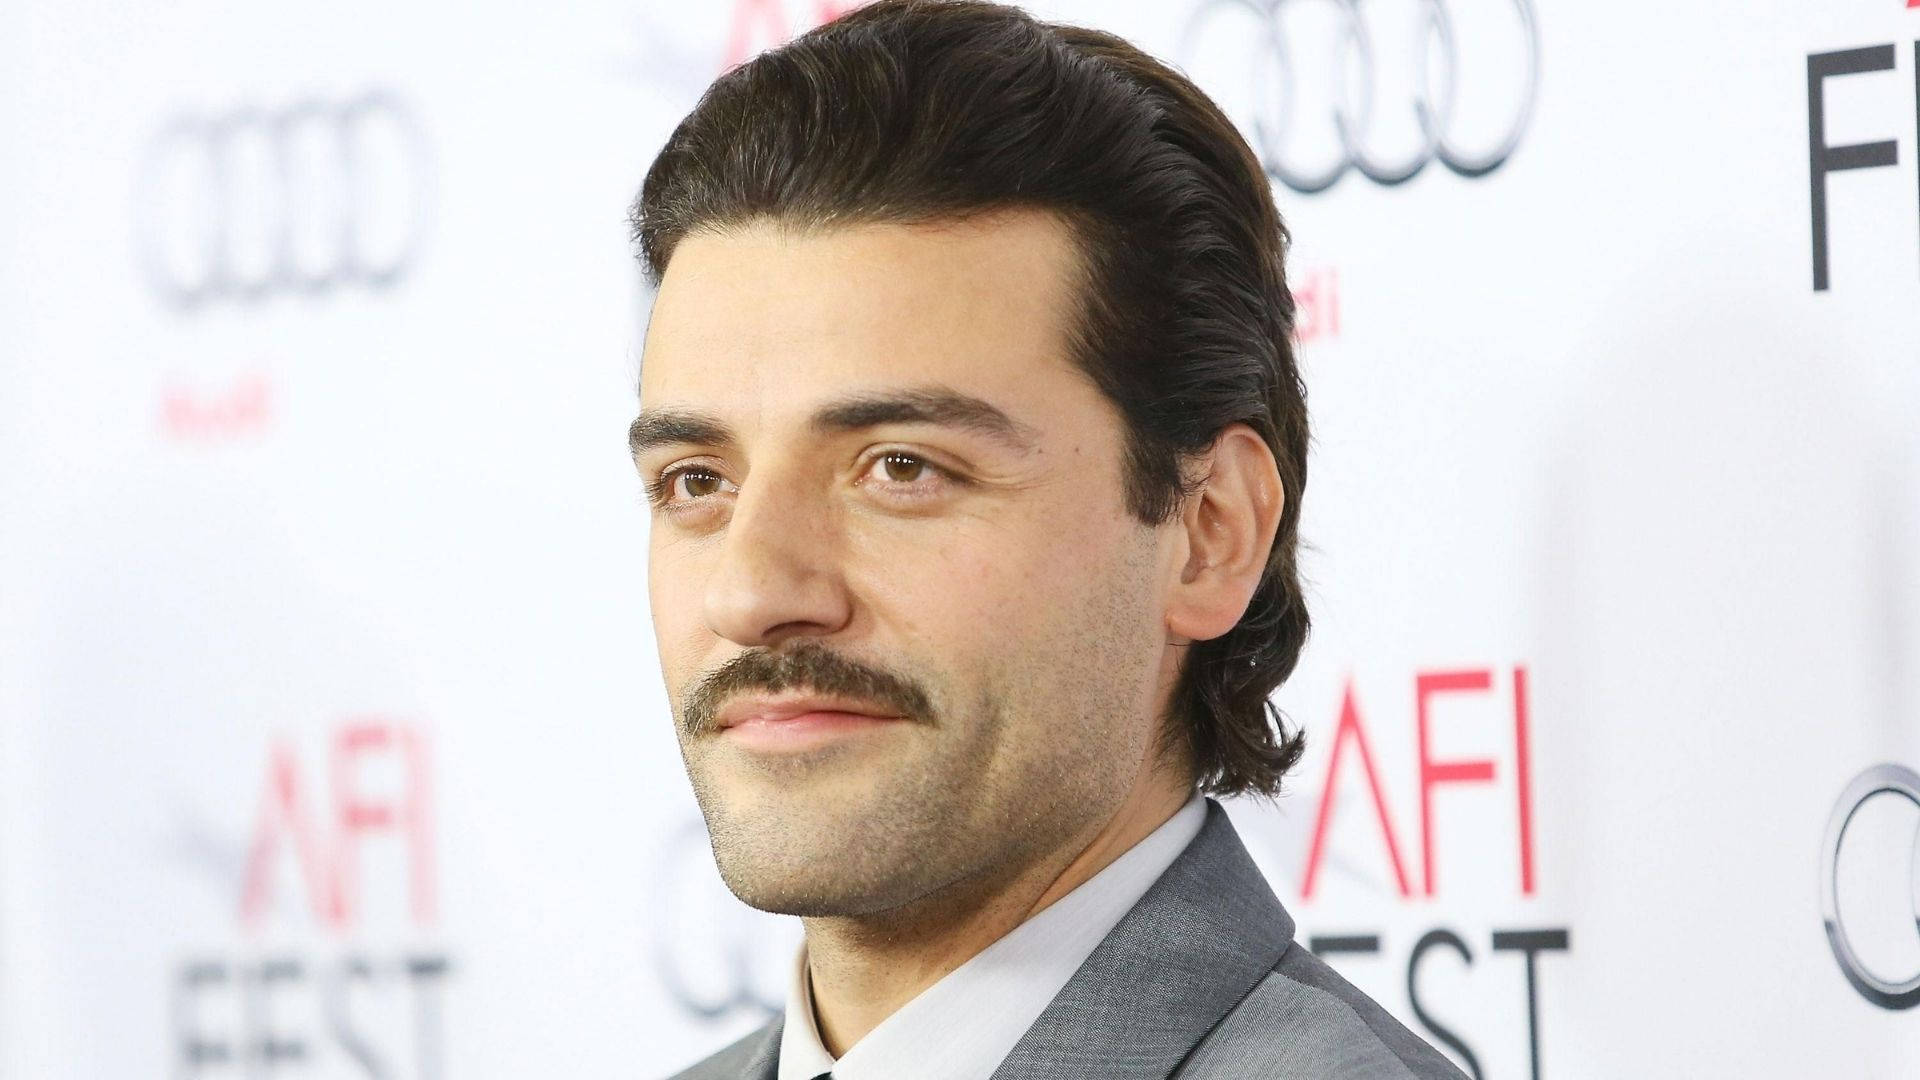 Manly Look Of Oscar Isaac Wallpaper